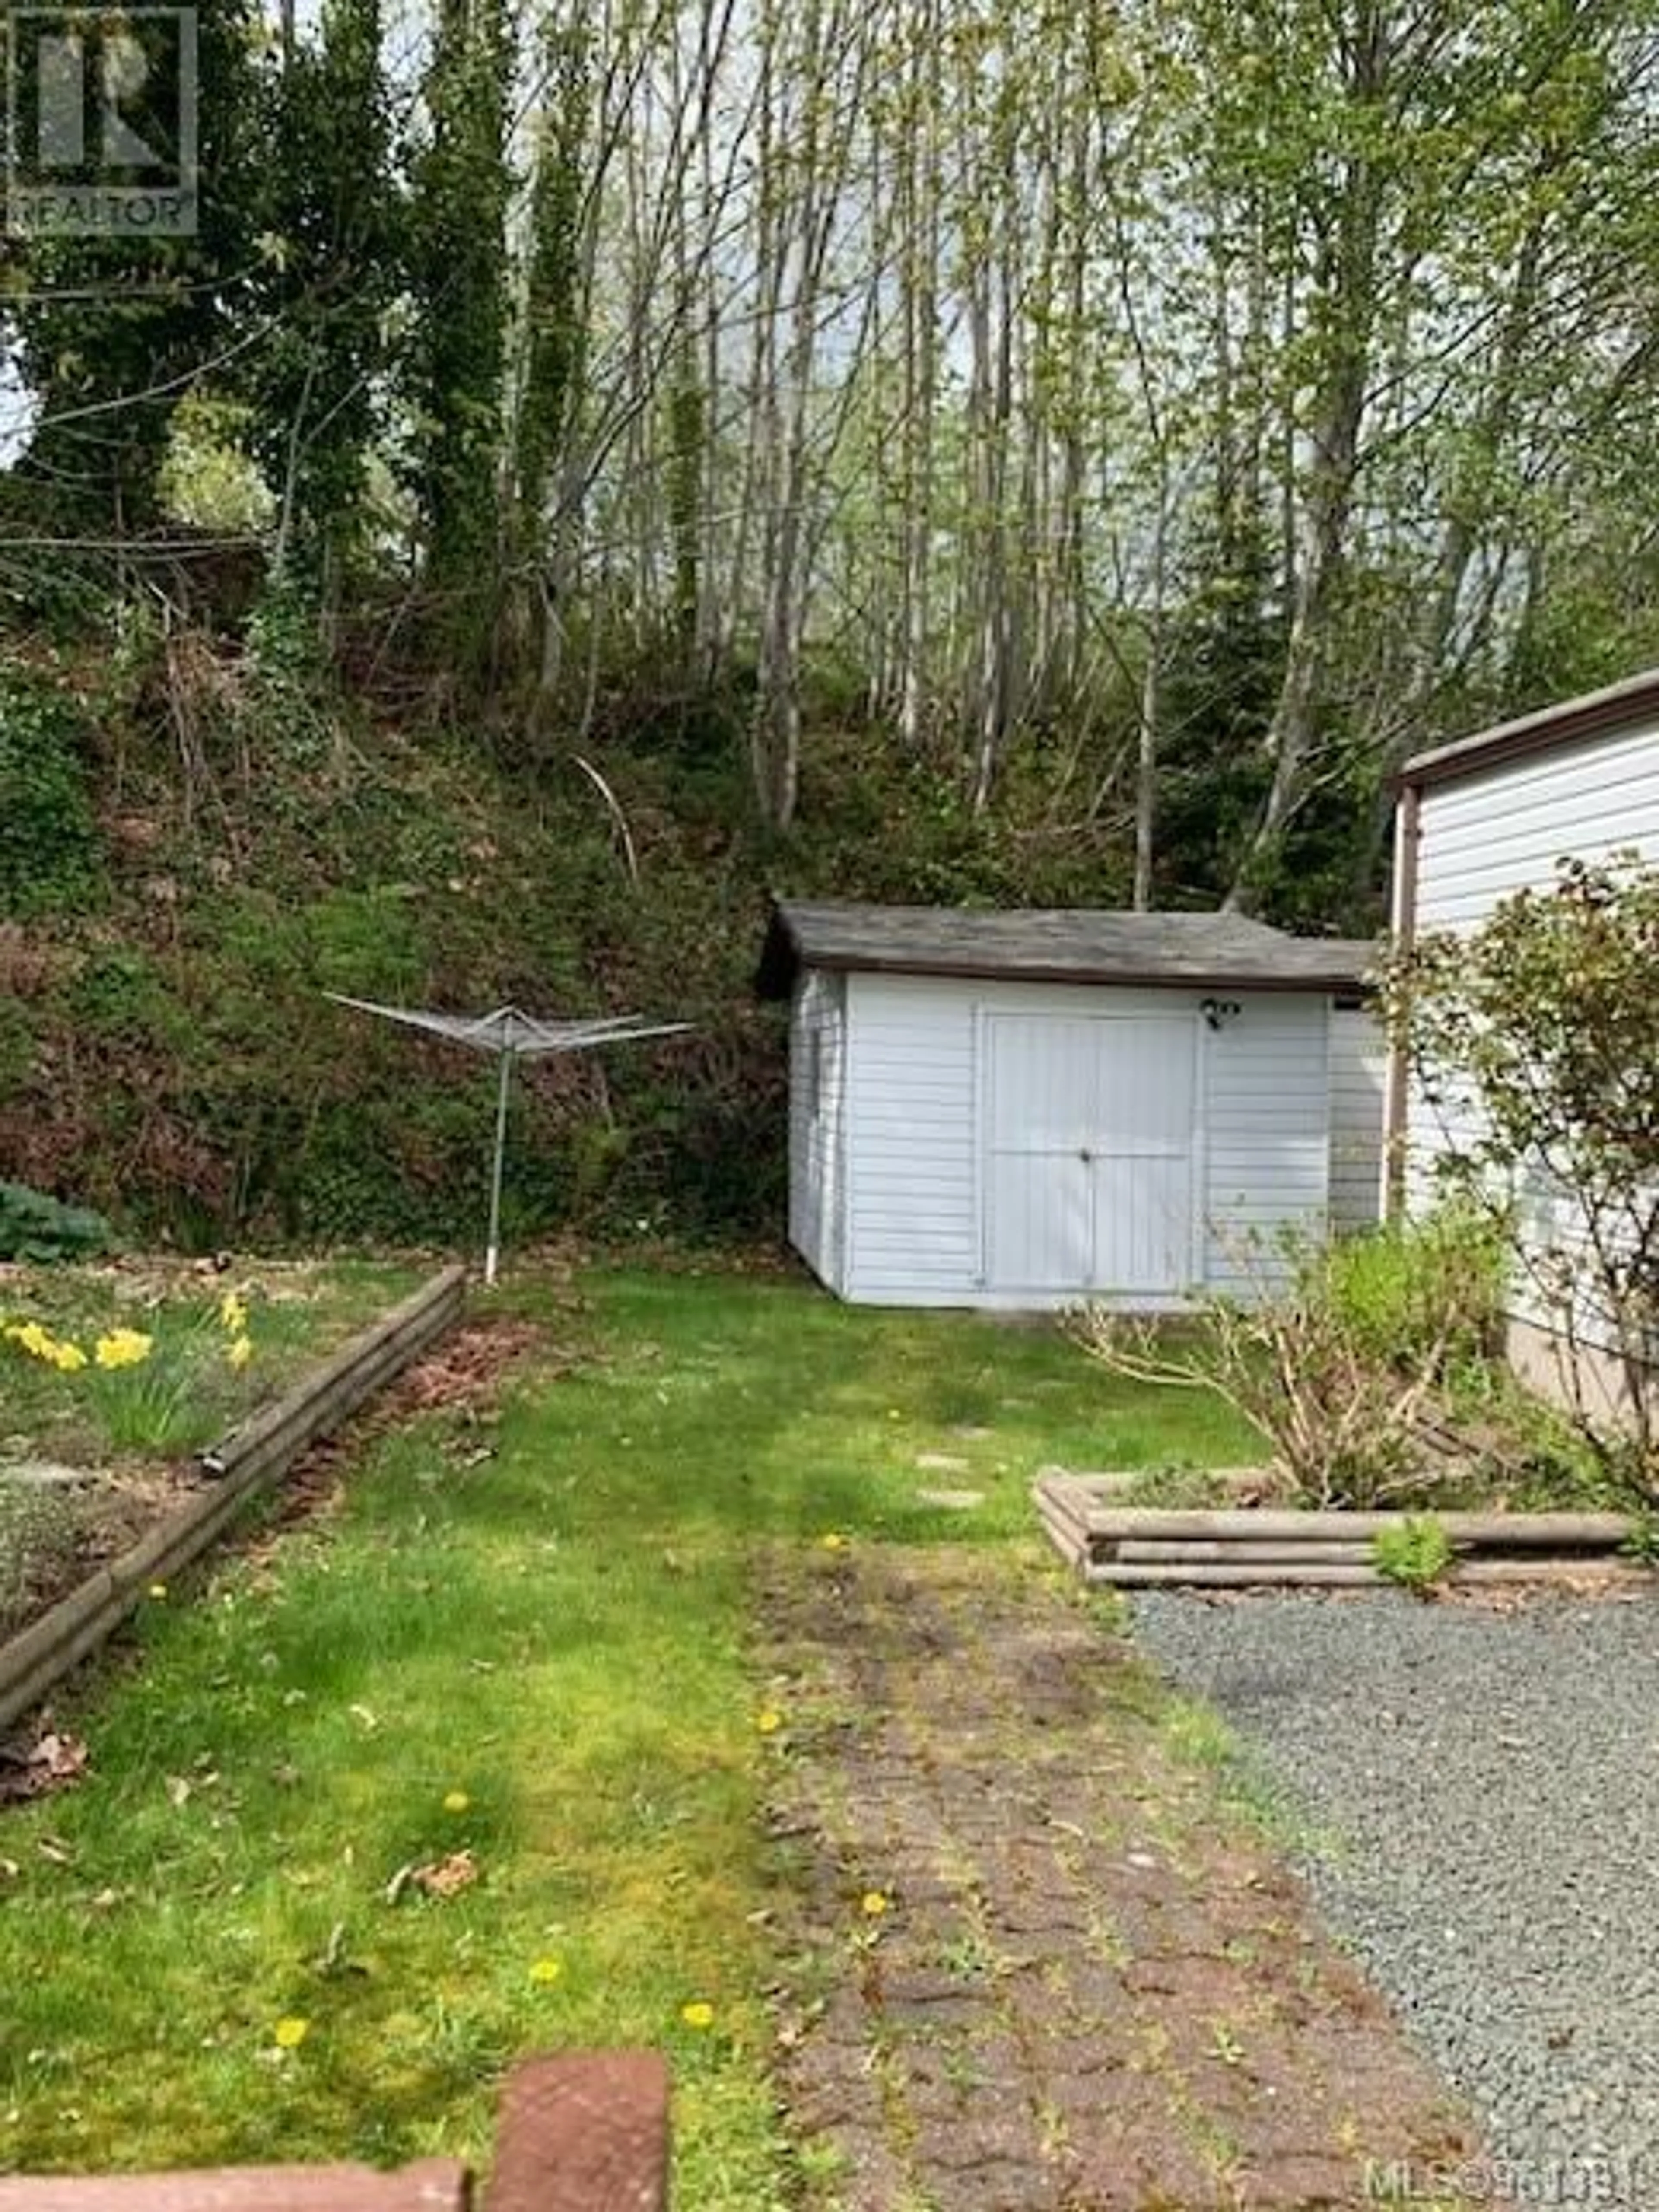 Shed for 74 951 Homewood Rd, Campbell River British Columbia V9W3N7